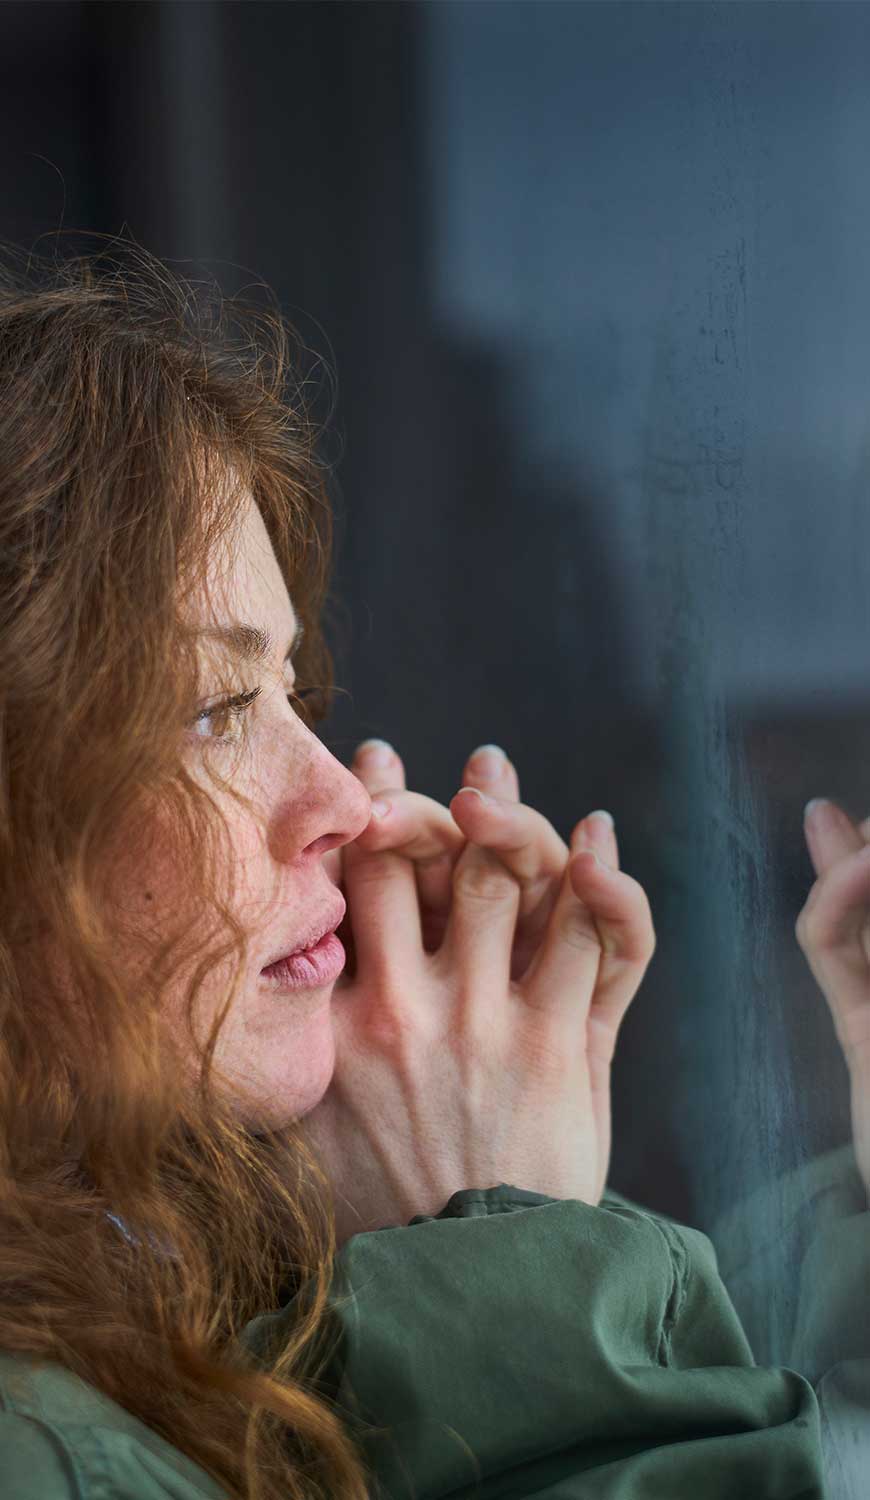 How to identify signs of mental ill-health